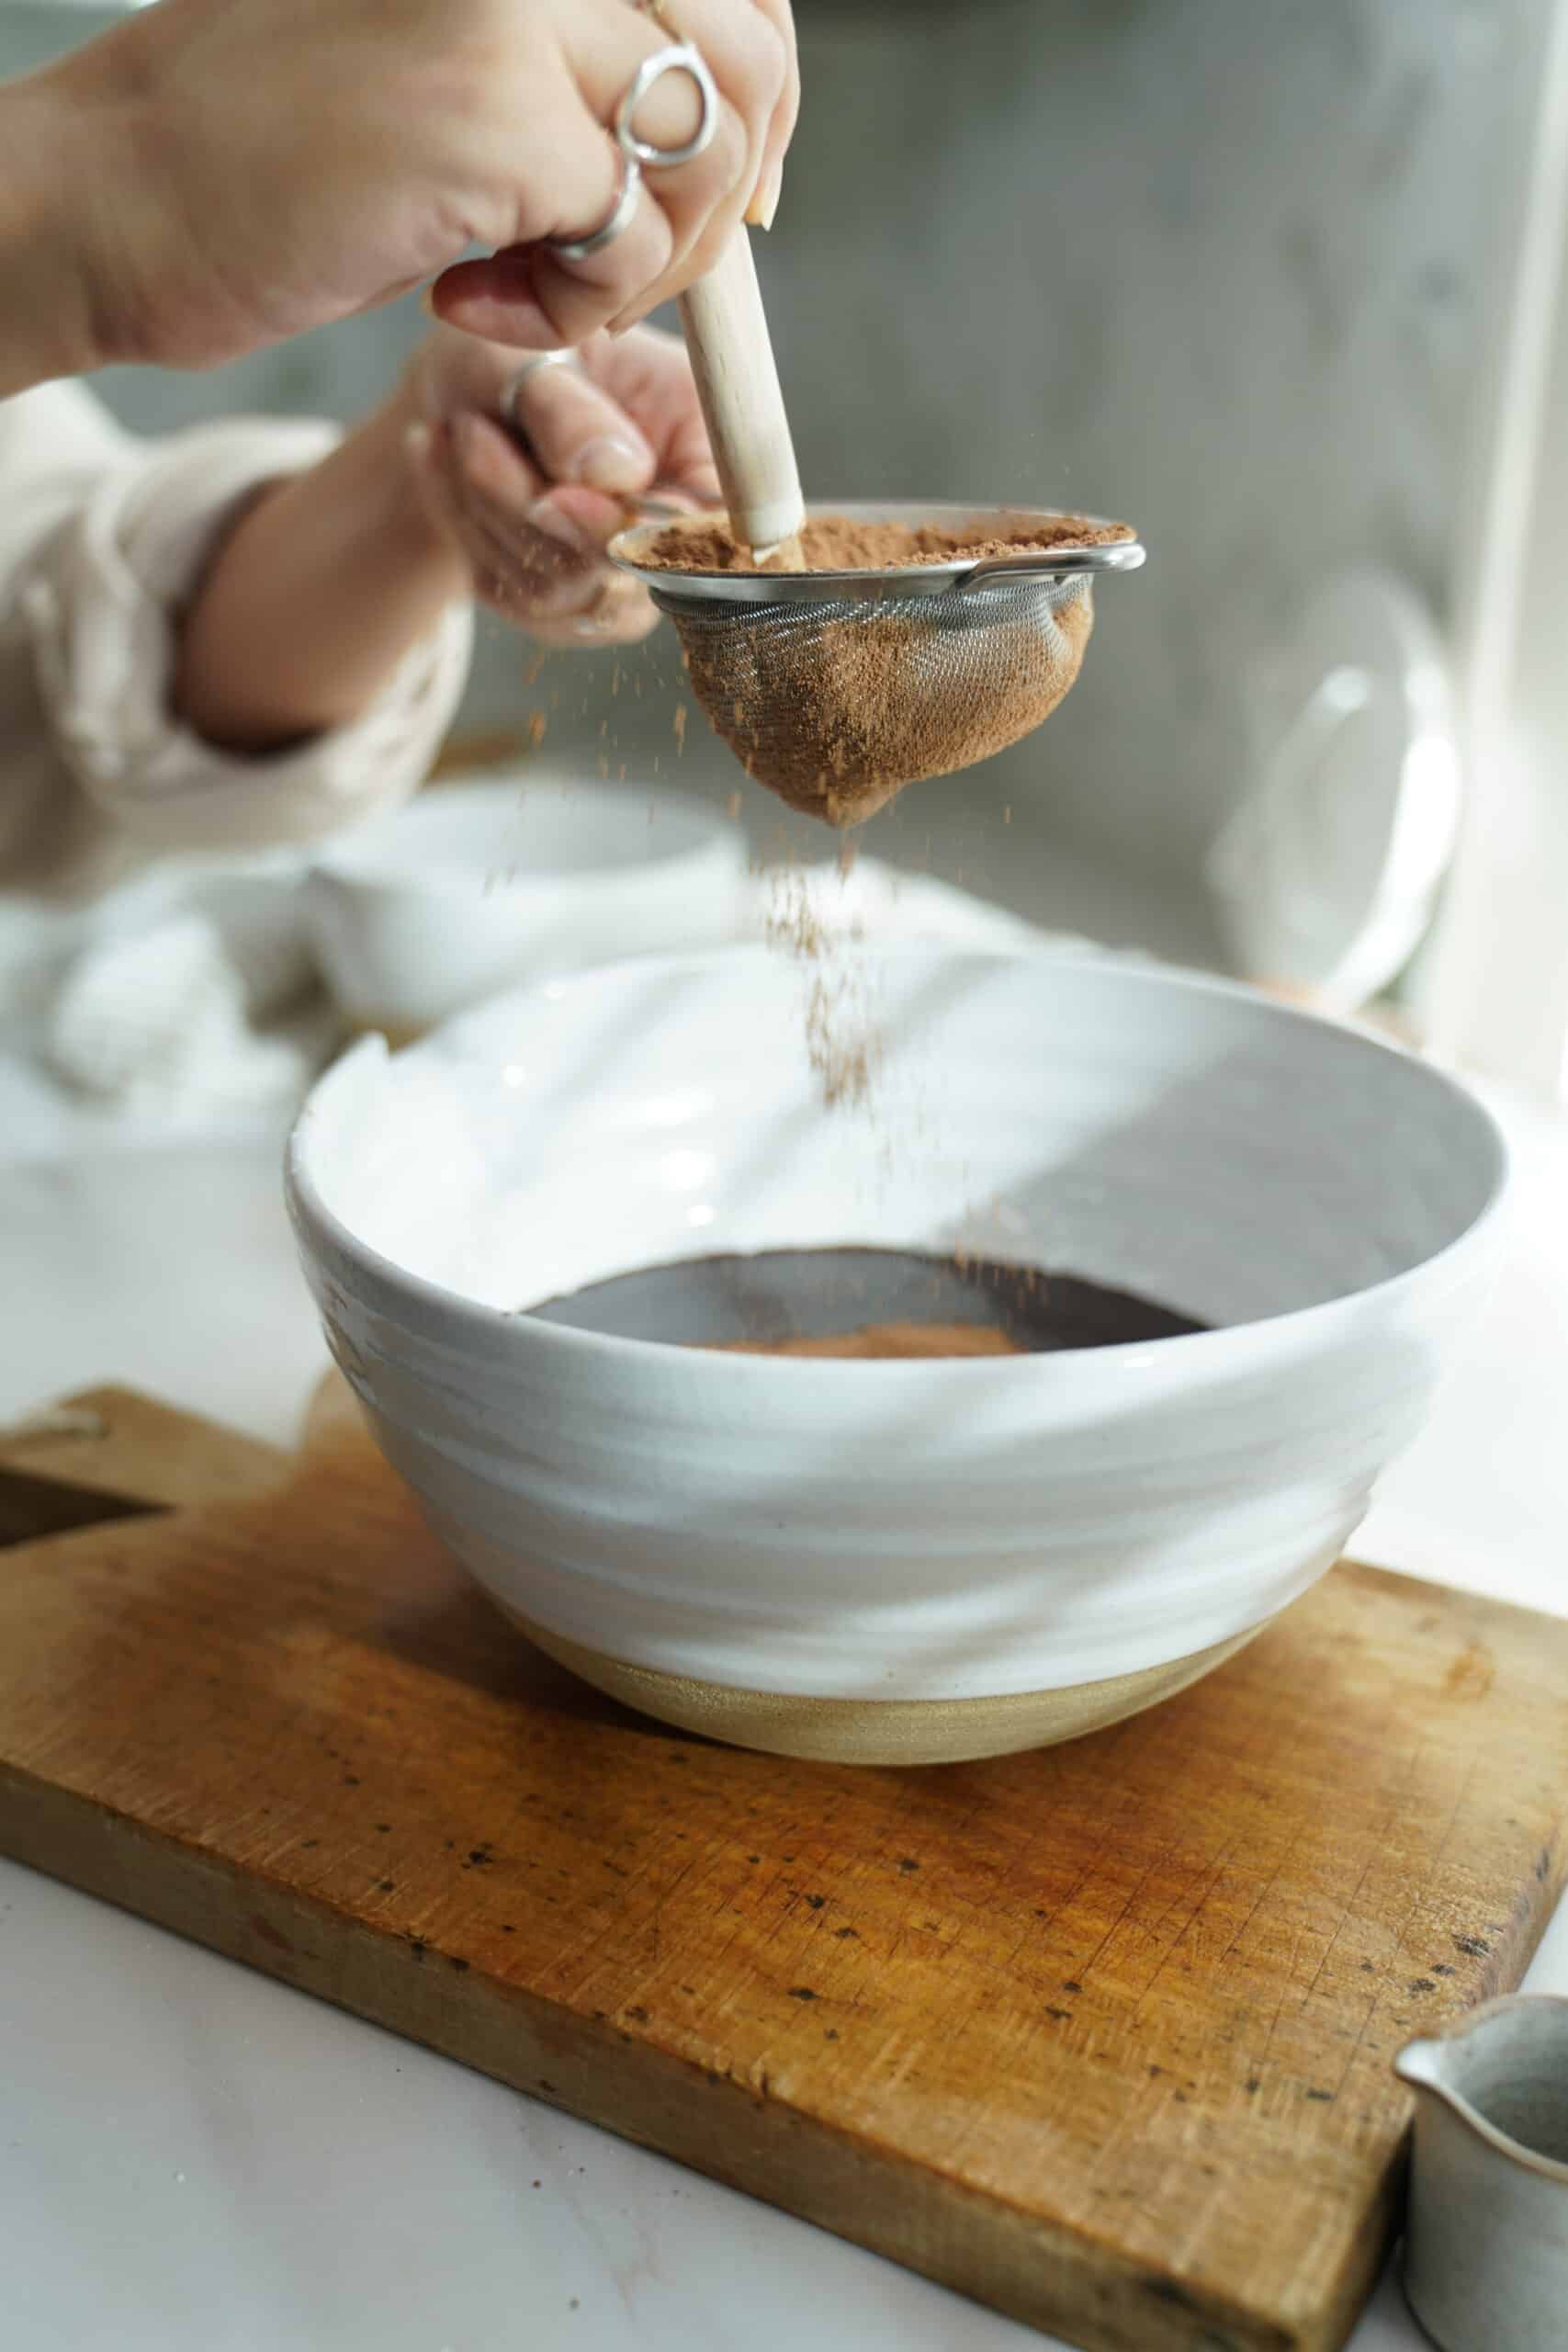 Sifting powder over chocolate